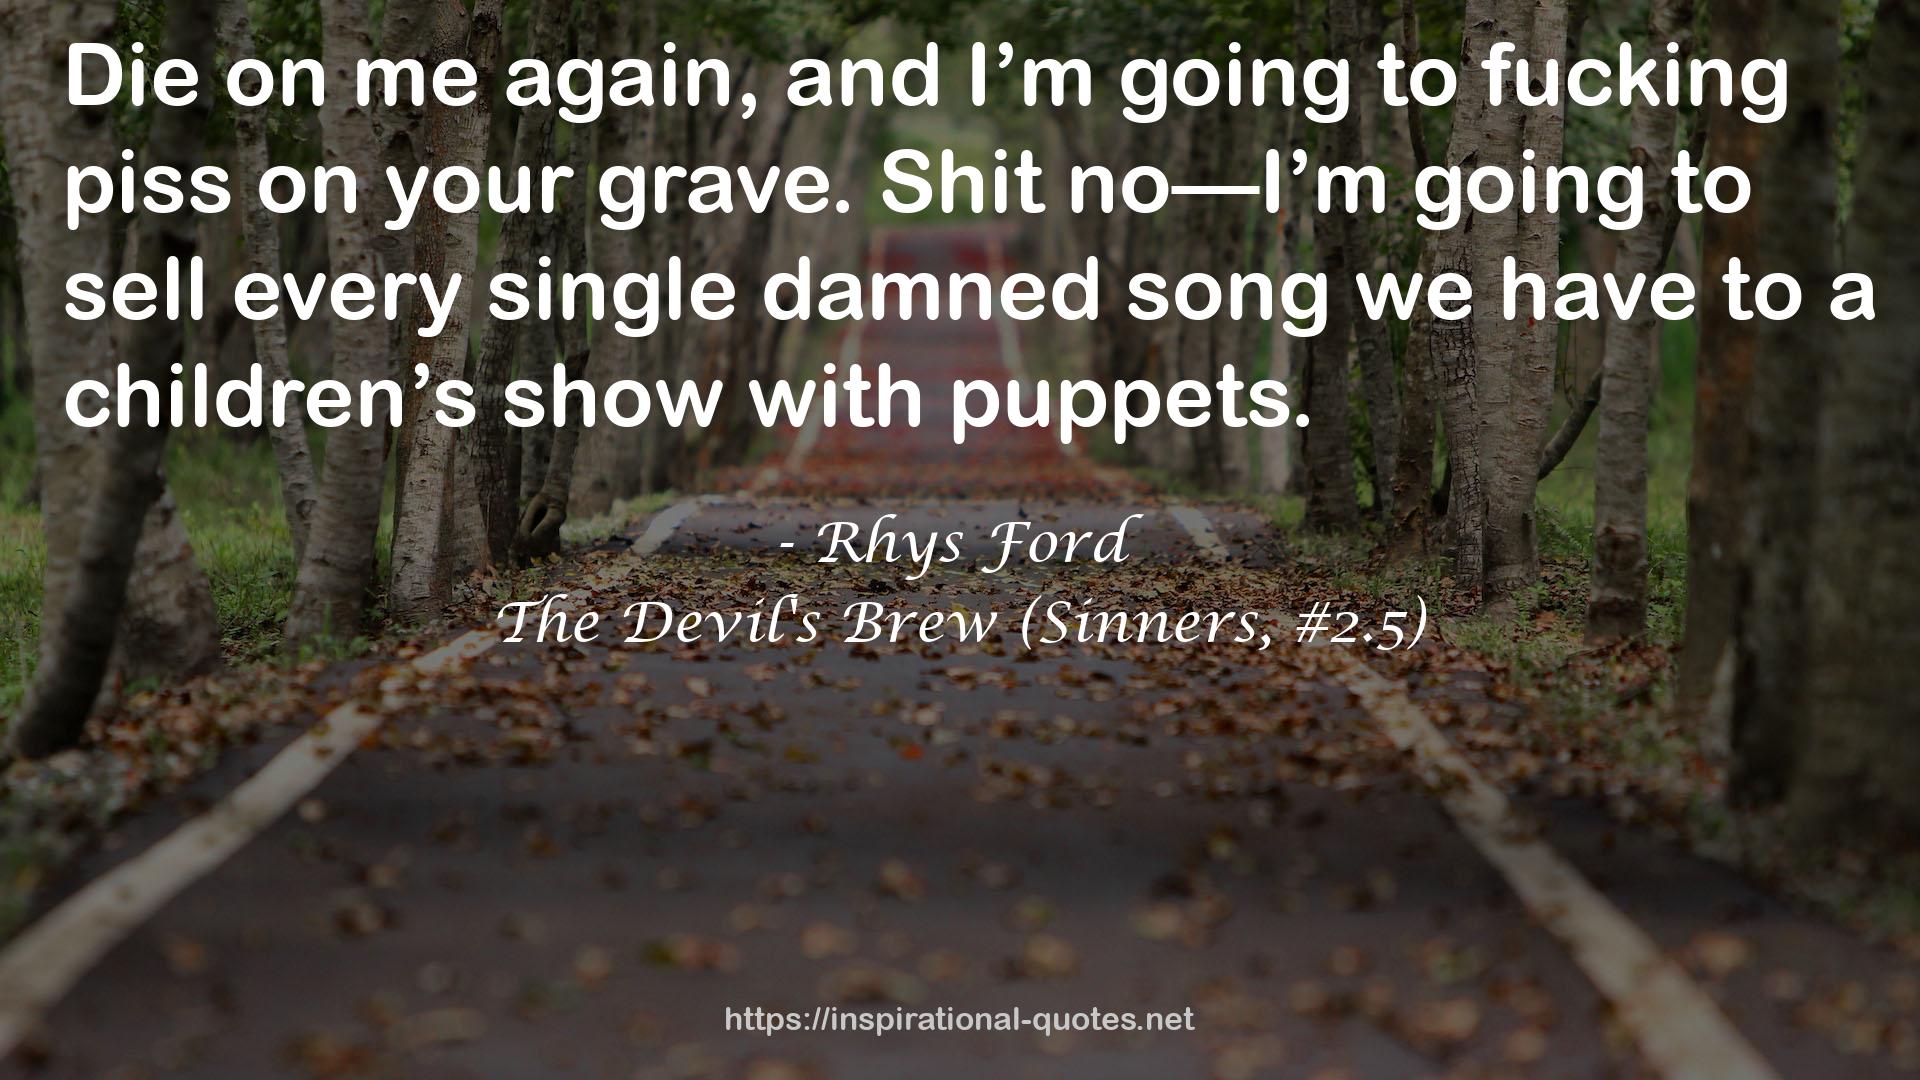 The Devil's Brew (Sinners, #2.5) QUOTES